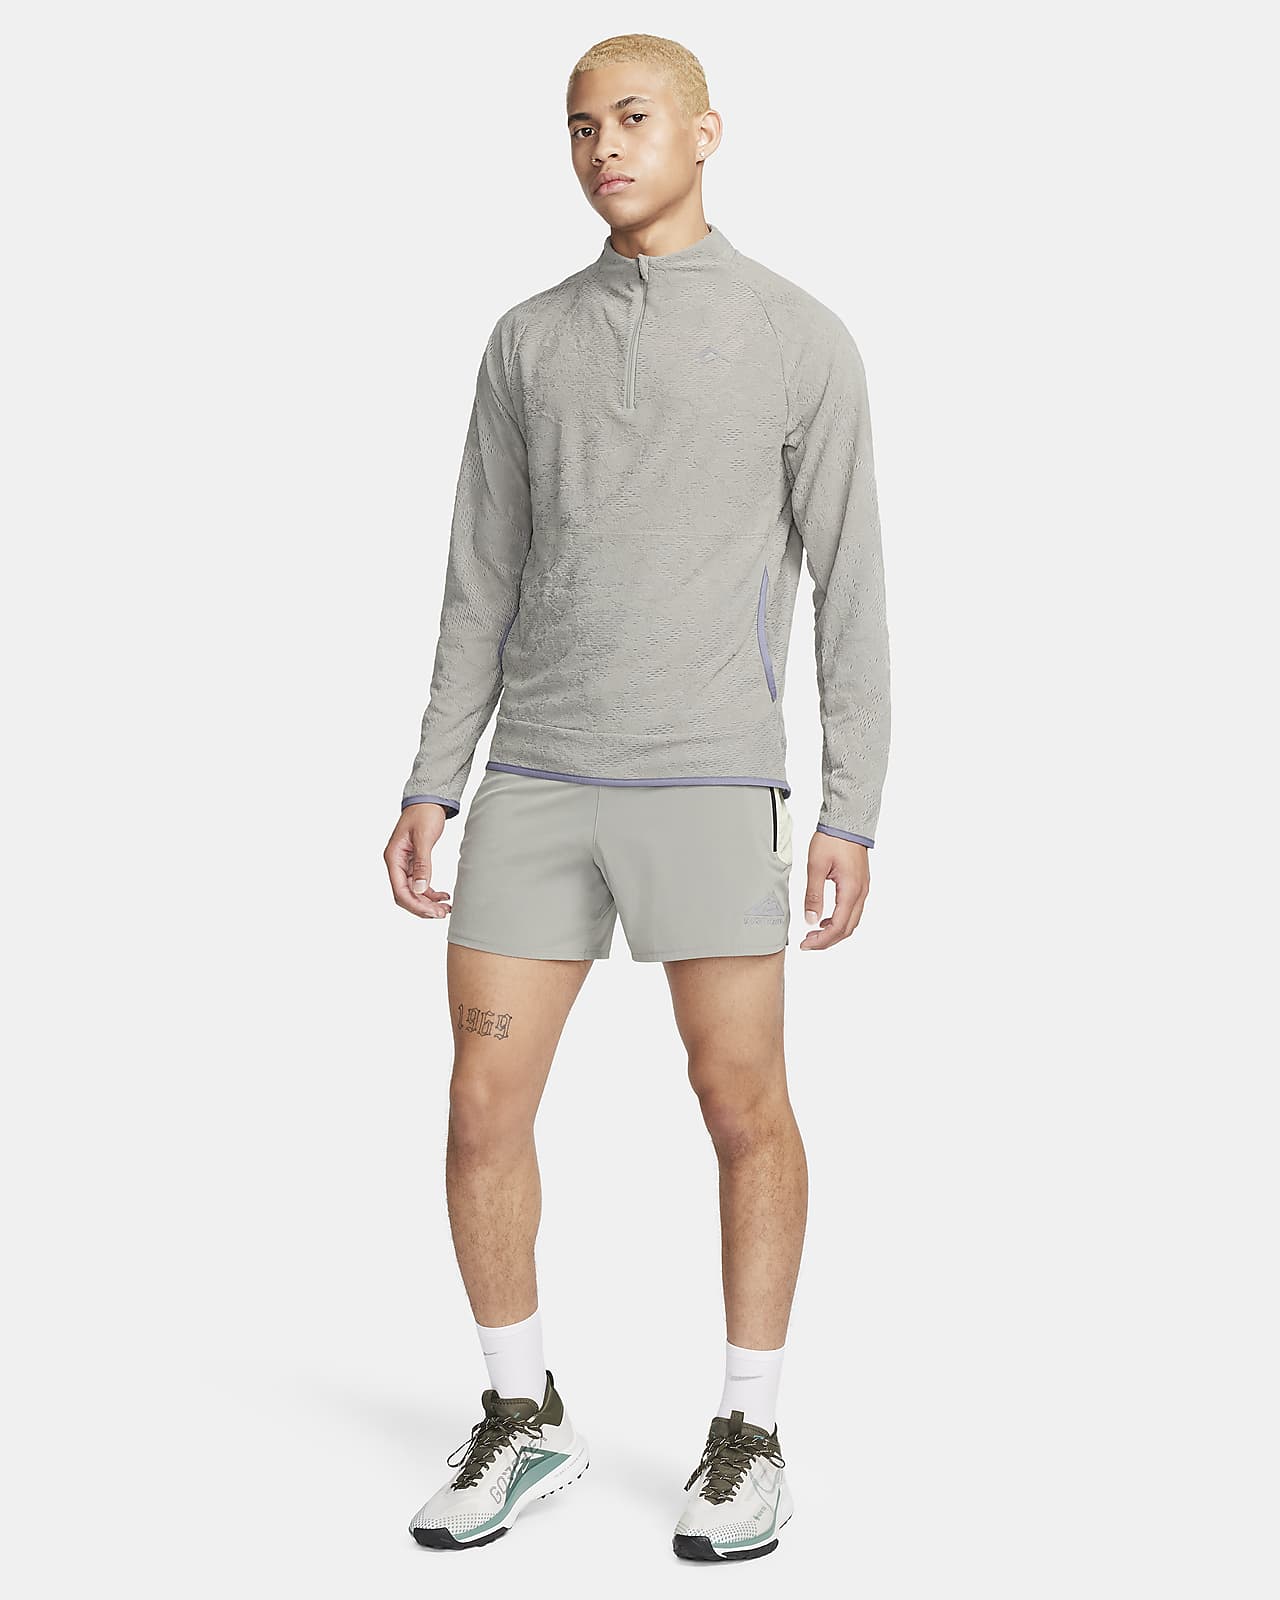 Runner's Guide to Wearing Compression Shorts. Nike SK